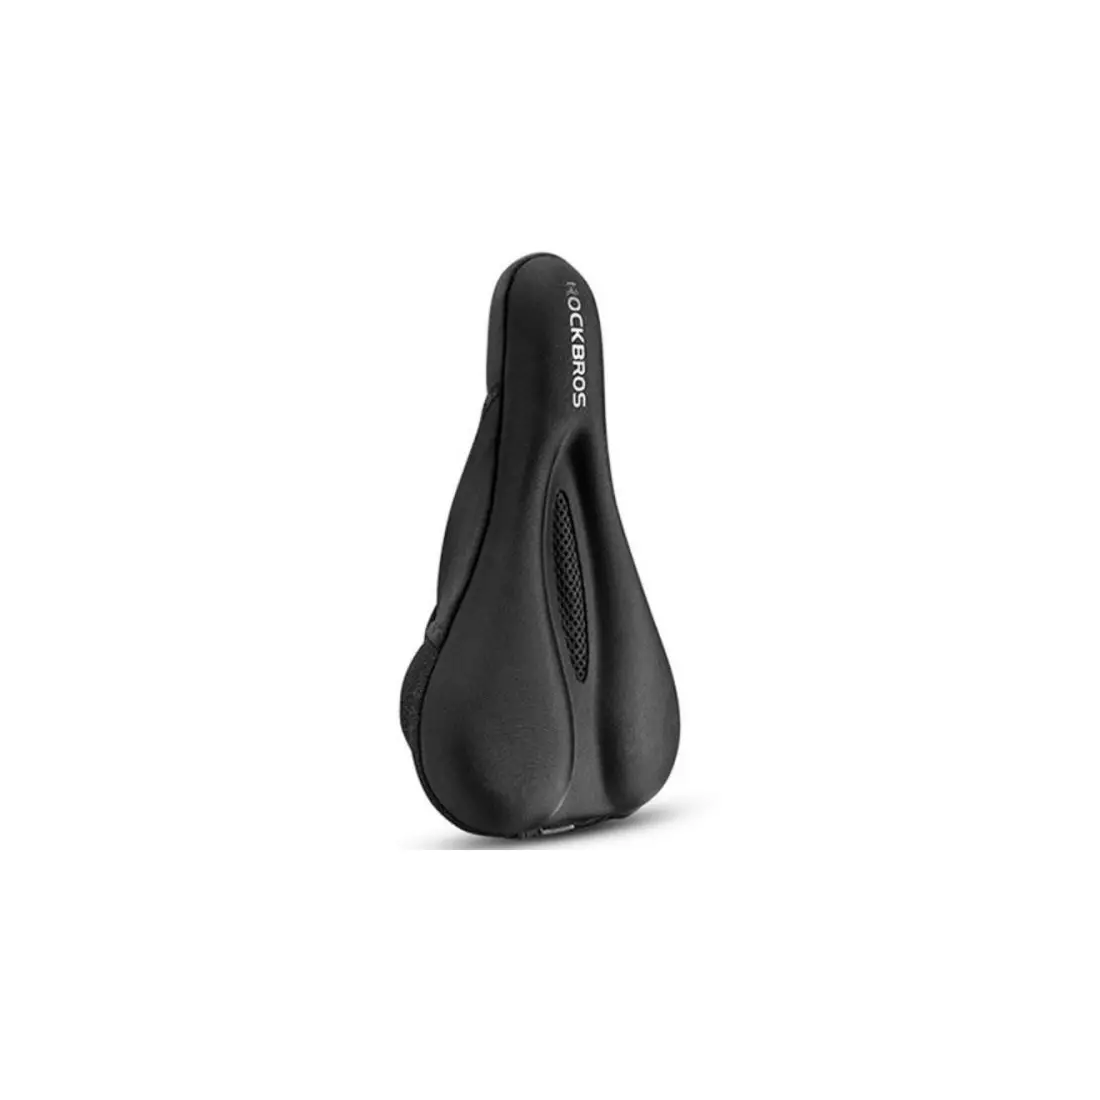 ROCKBROS Bicycle seat cover with rain protection LF037